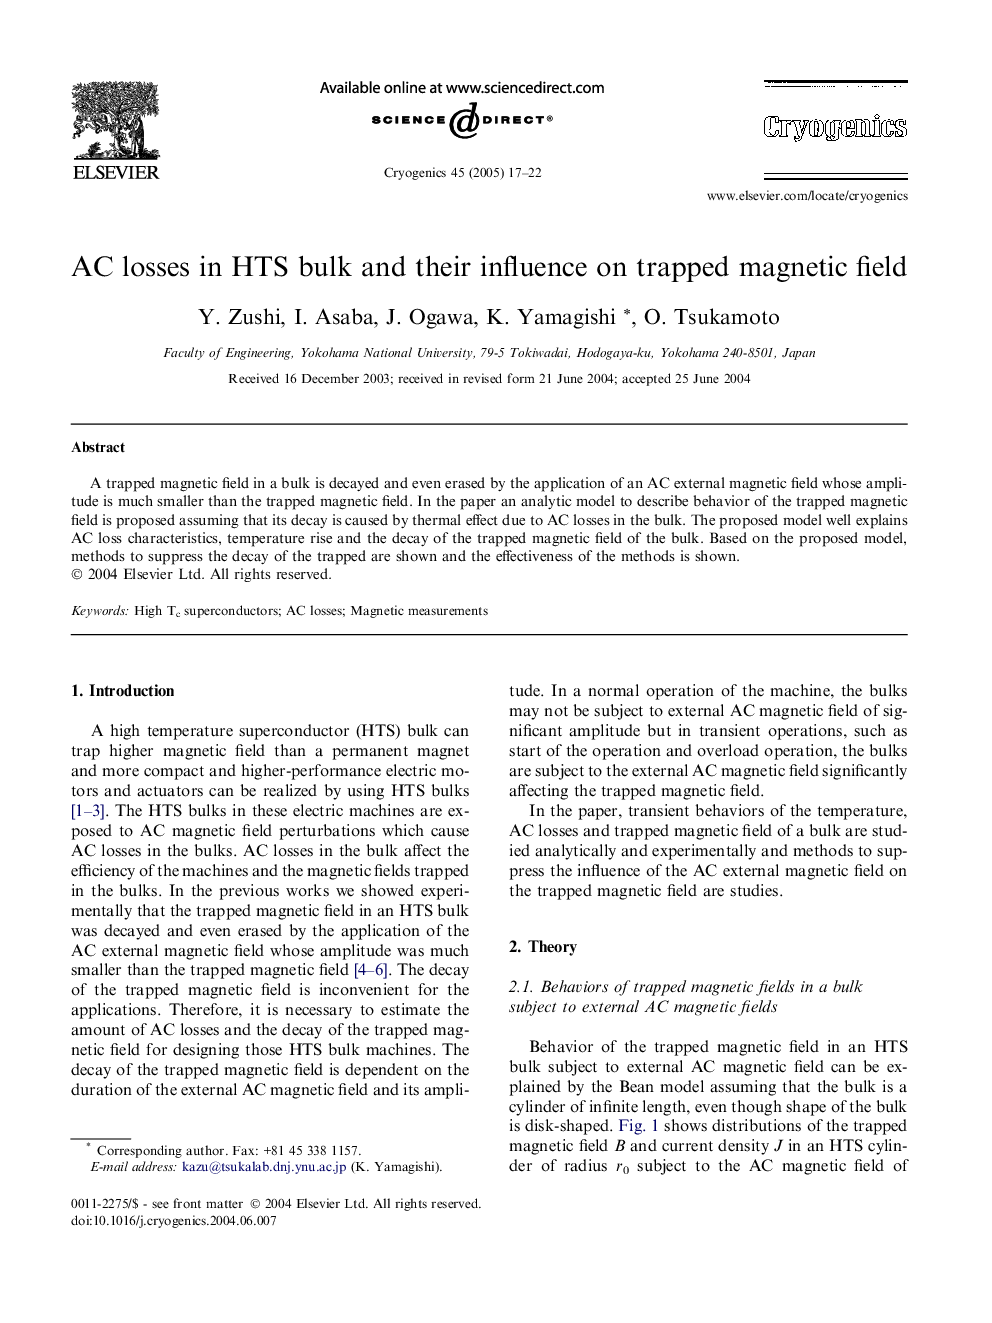 AC losses in HTS bulk and their influence on trapped magnetic field